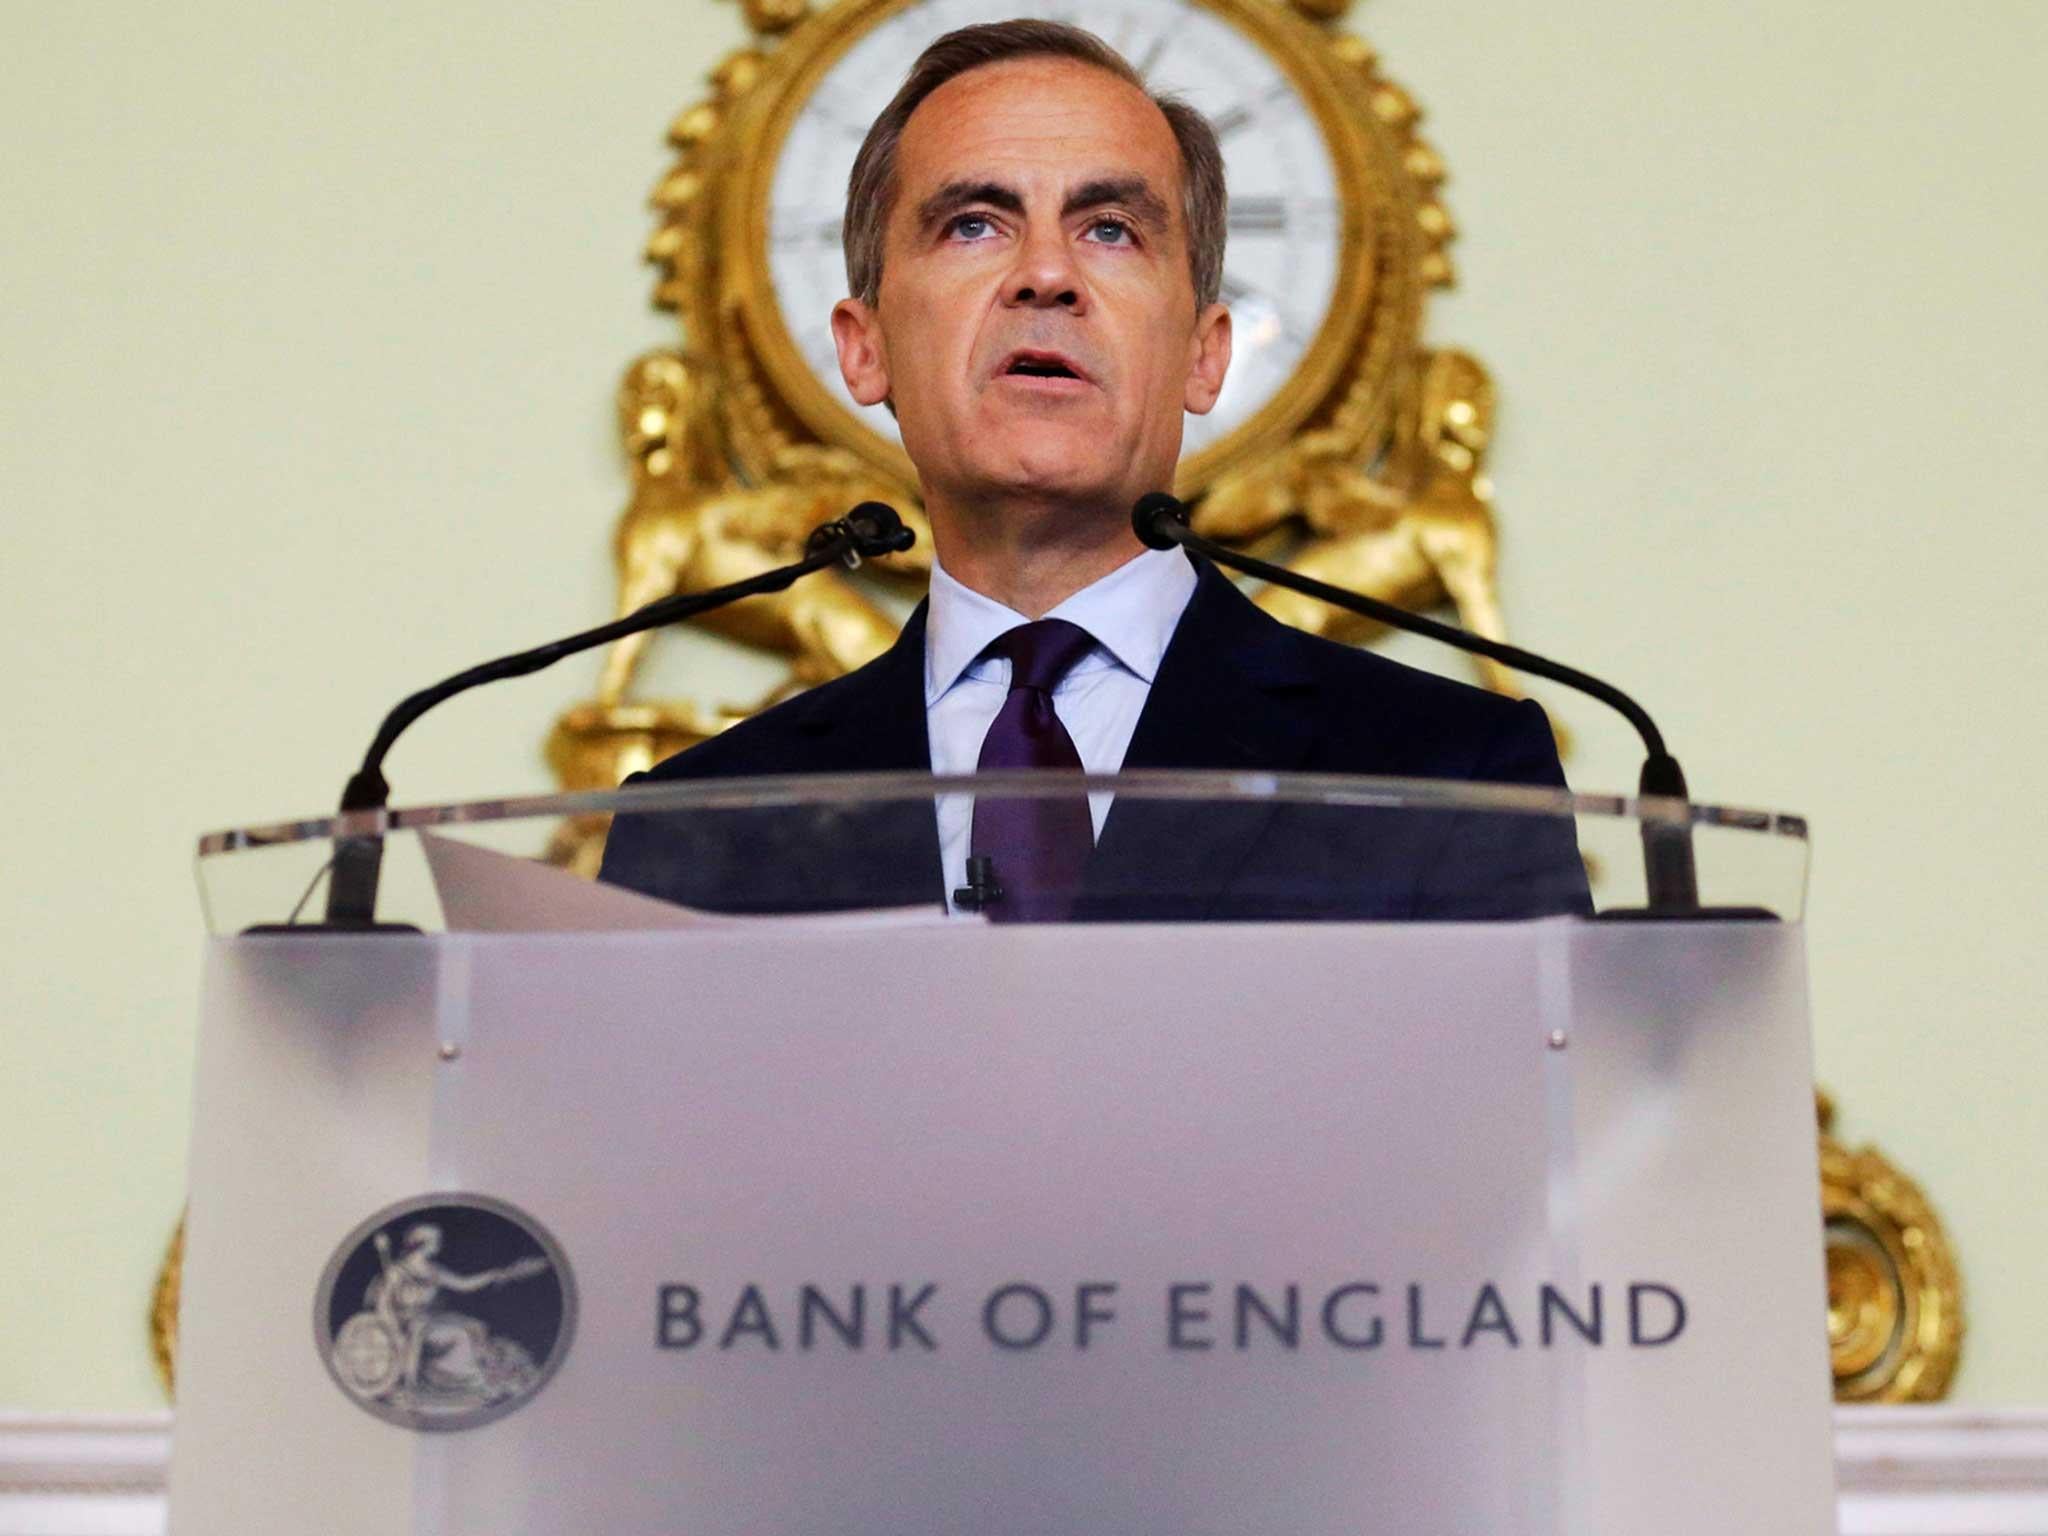 Mark Carney is expected to lower the Bank of England's interest rate from its already historic low on Thursday